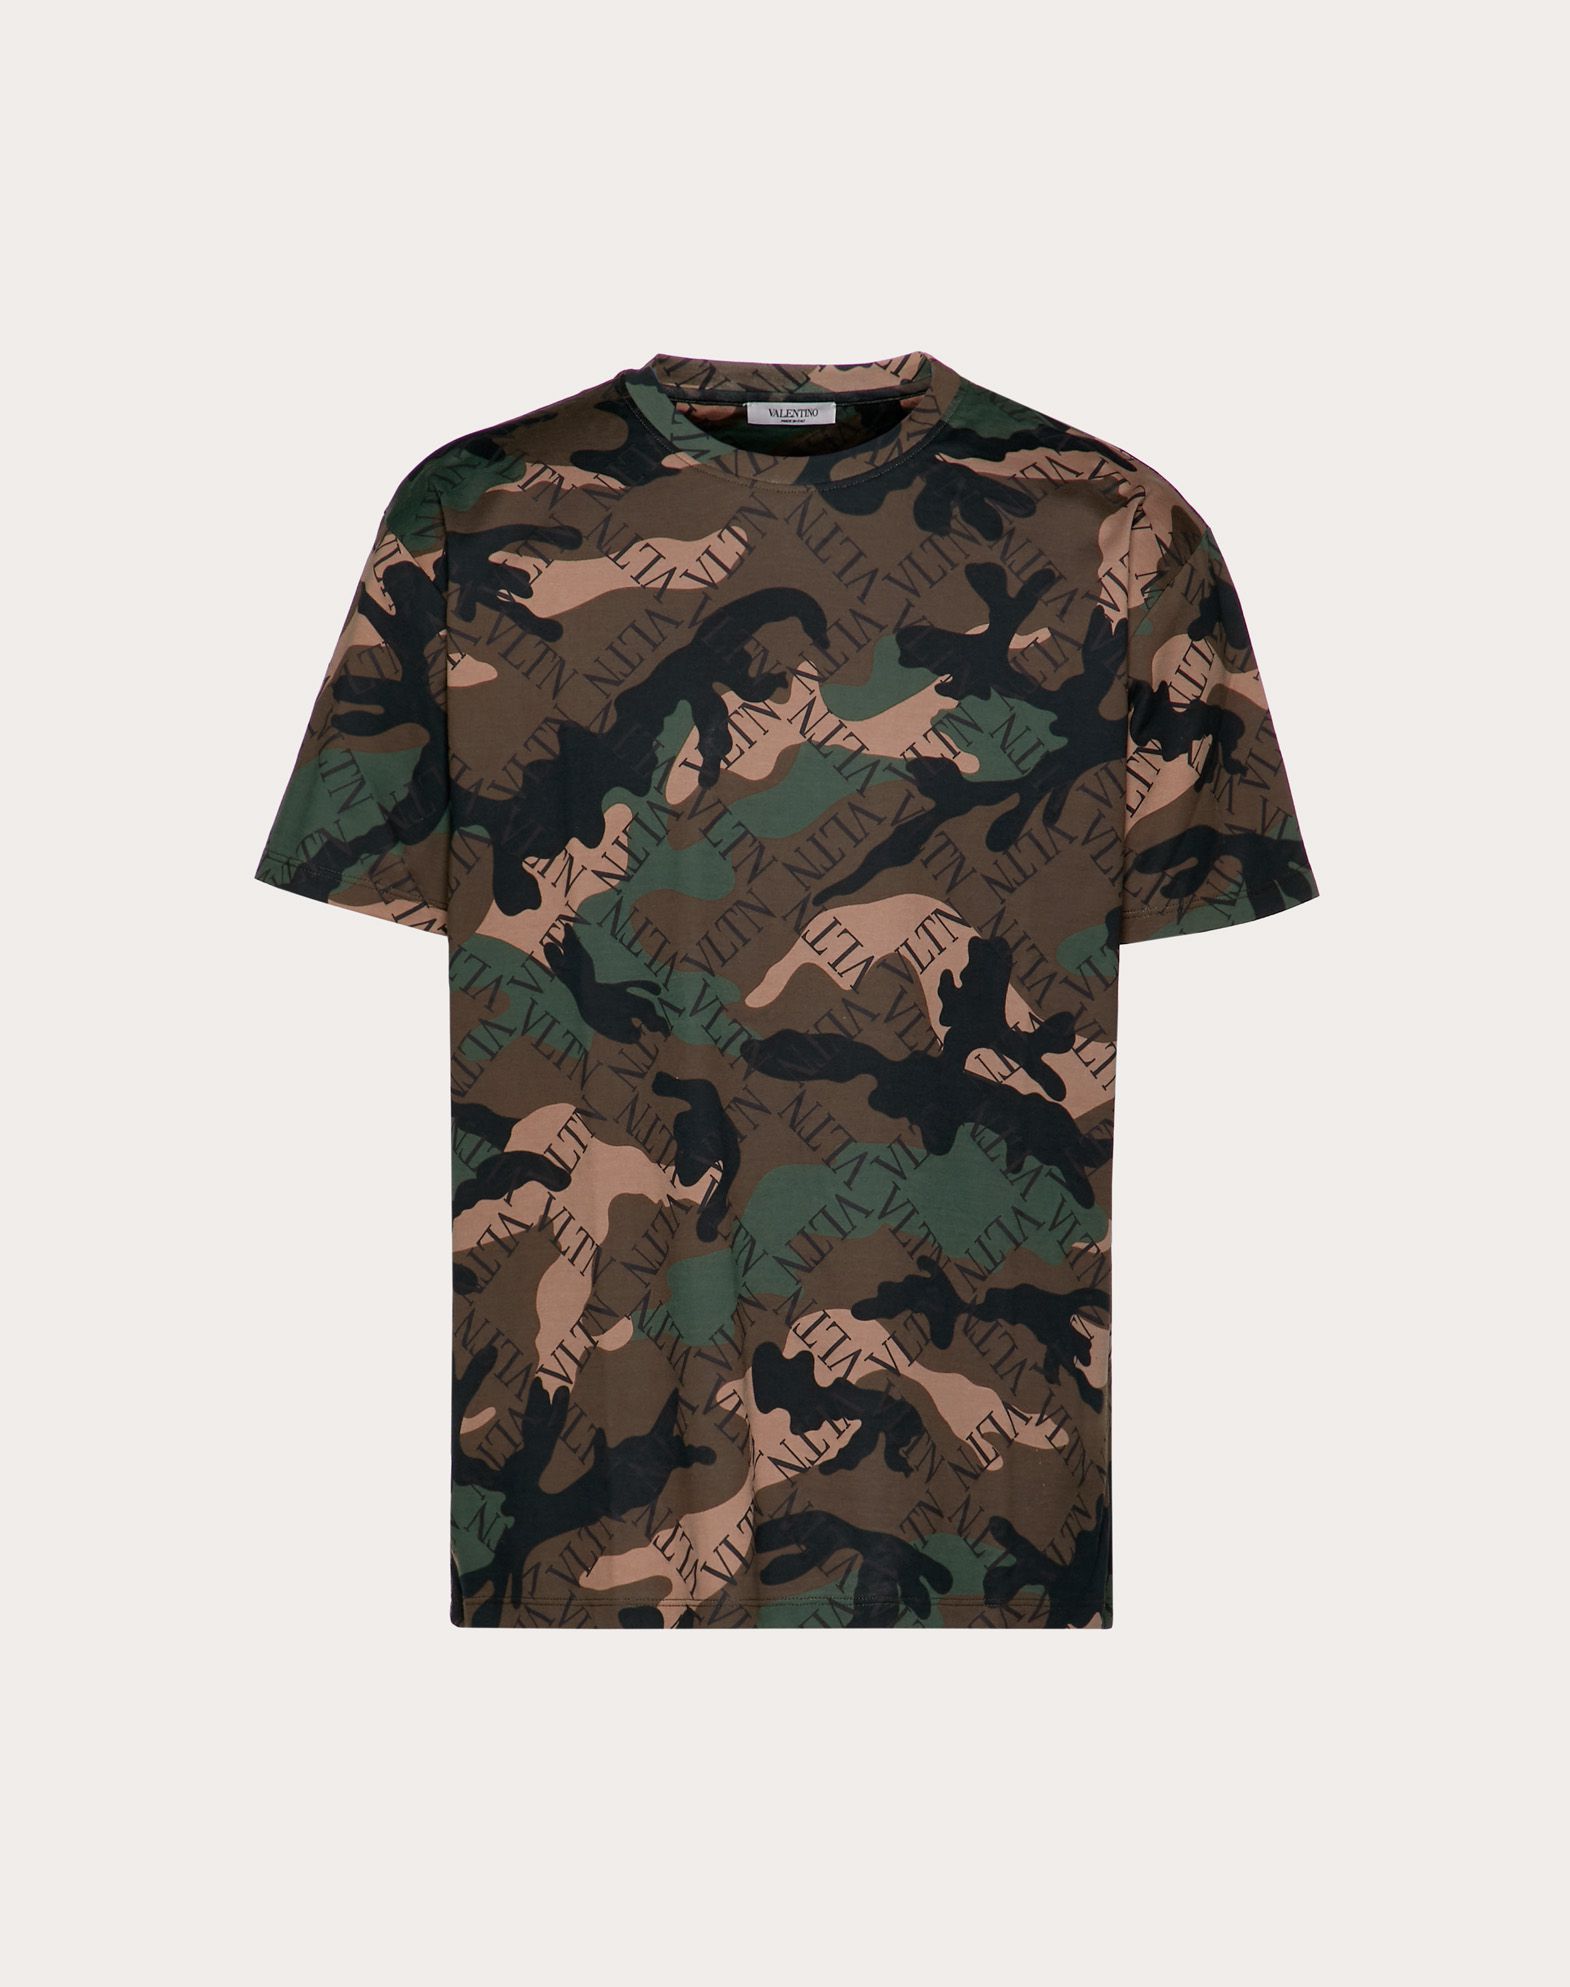 CAMOUFLAGE T-SHIRT WITH VLTN GRID PRINT 